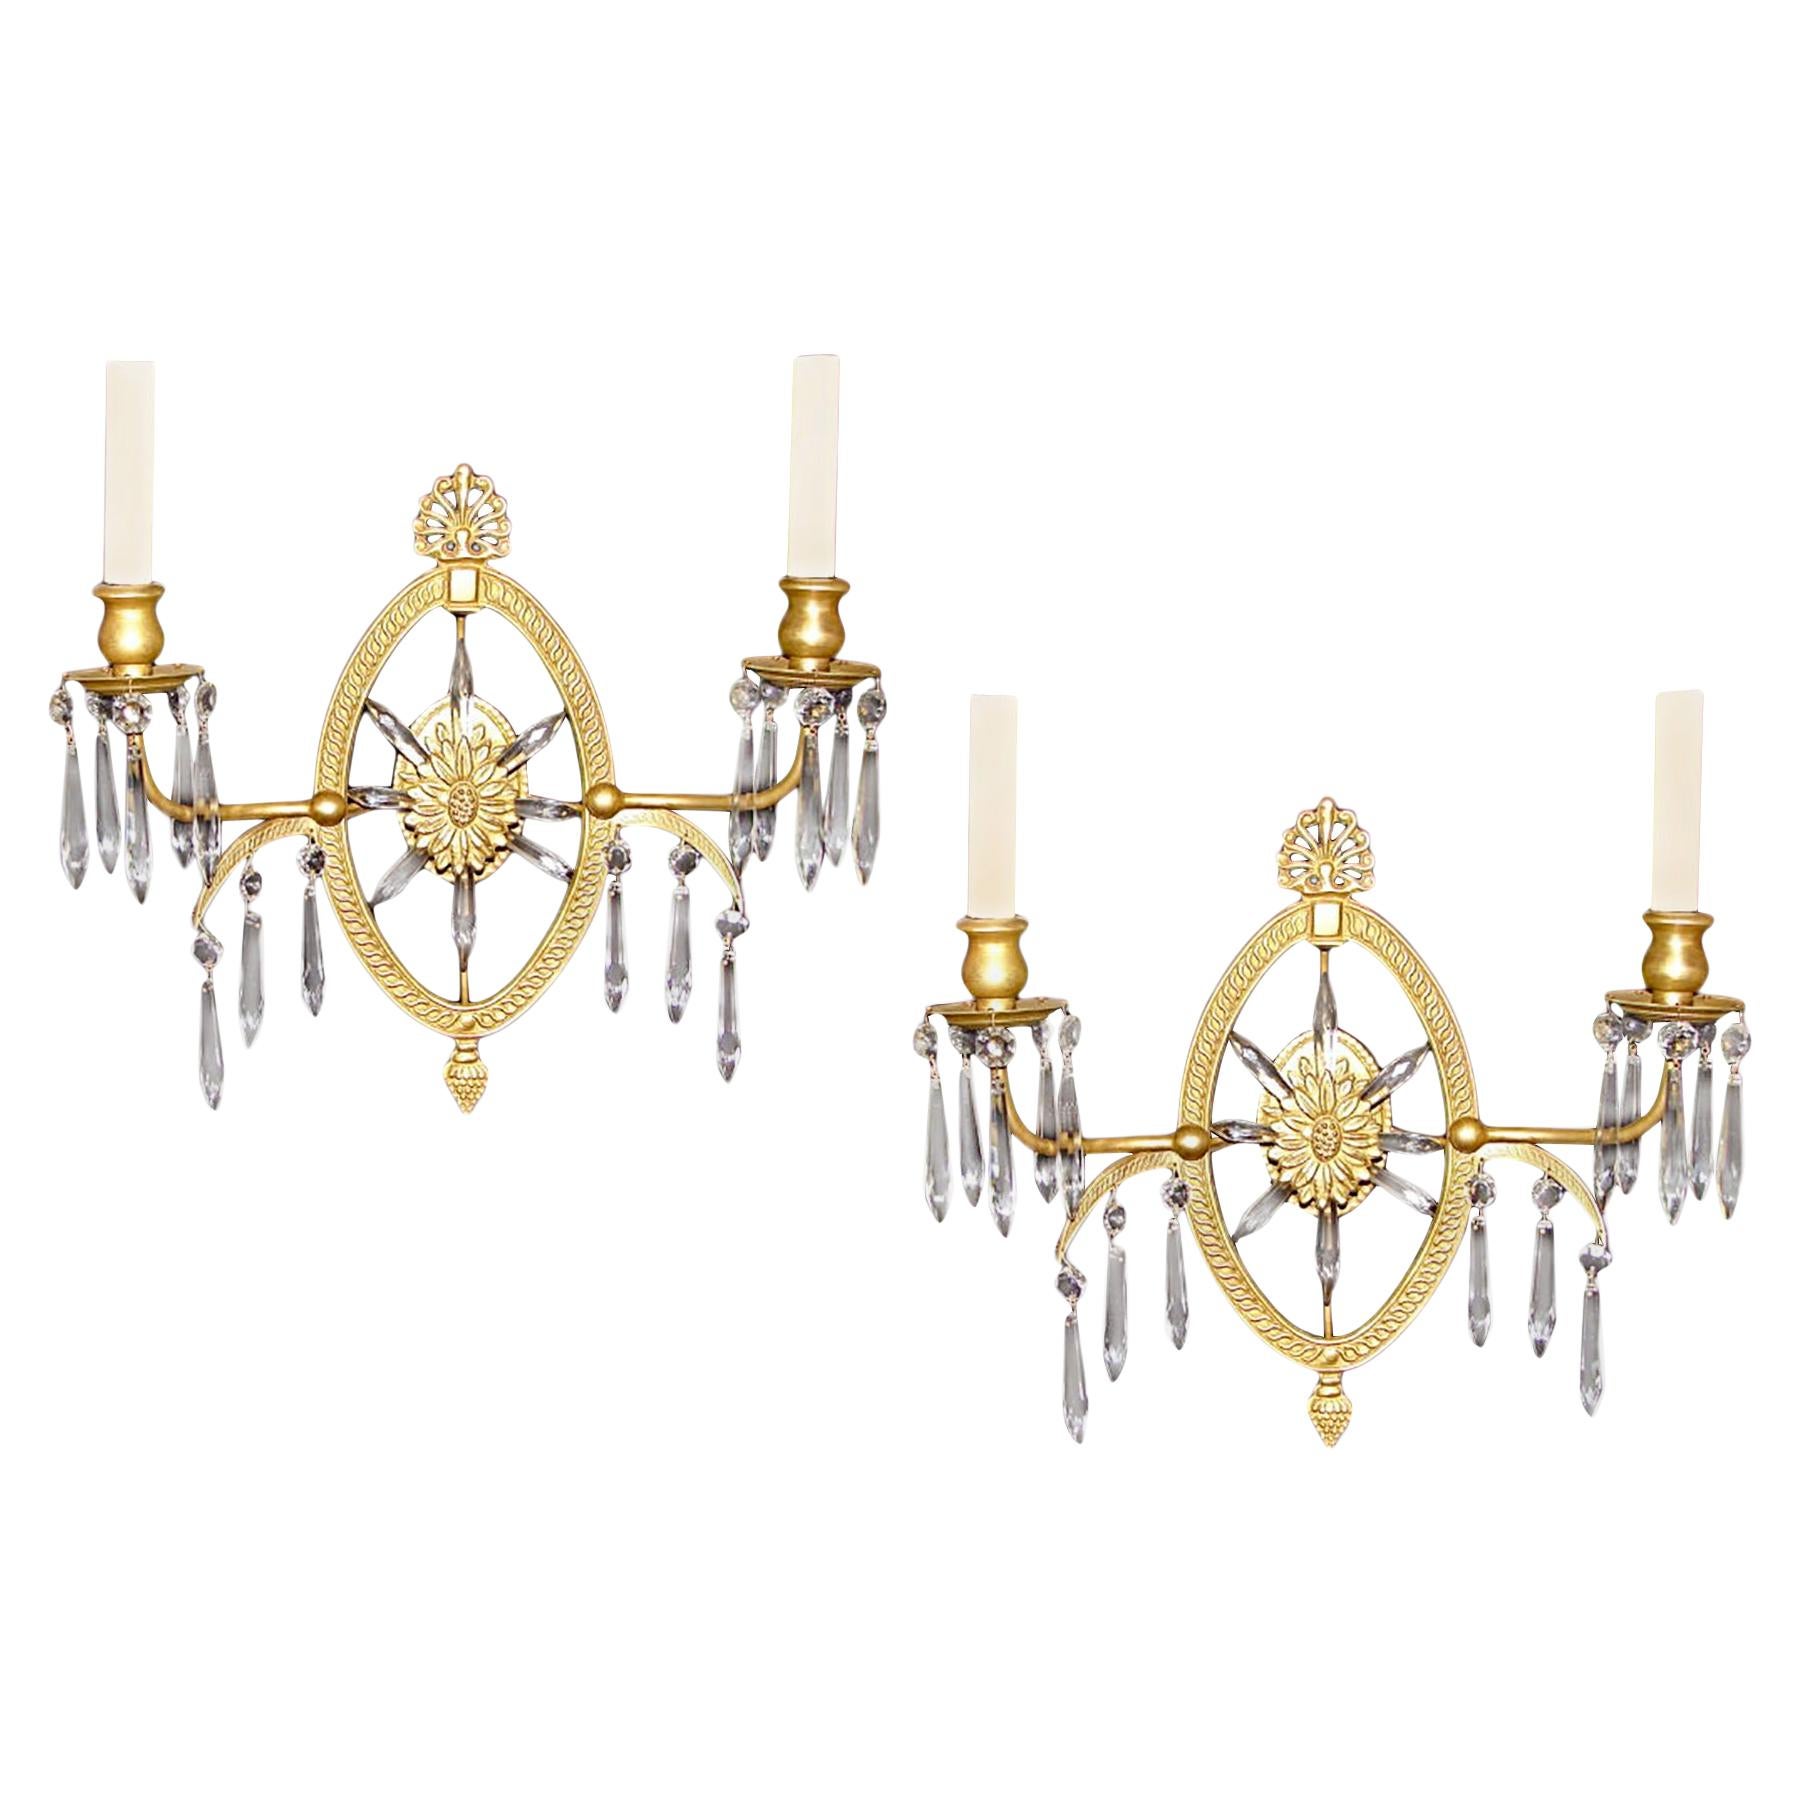 Set of Gilt Bronze Sconces, Sold in Pairs